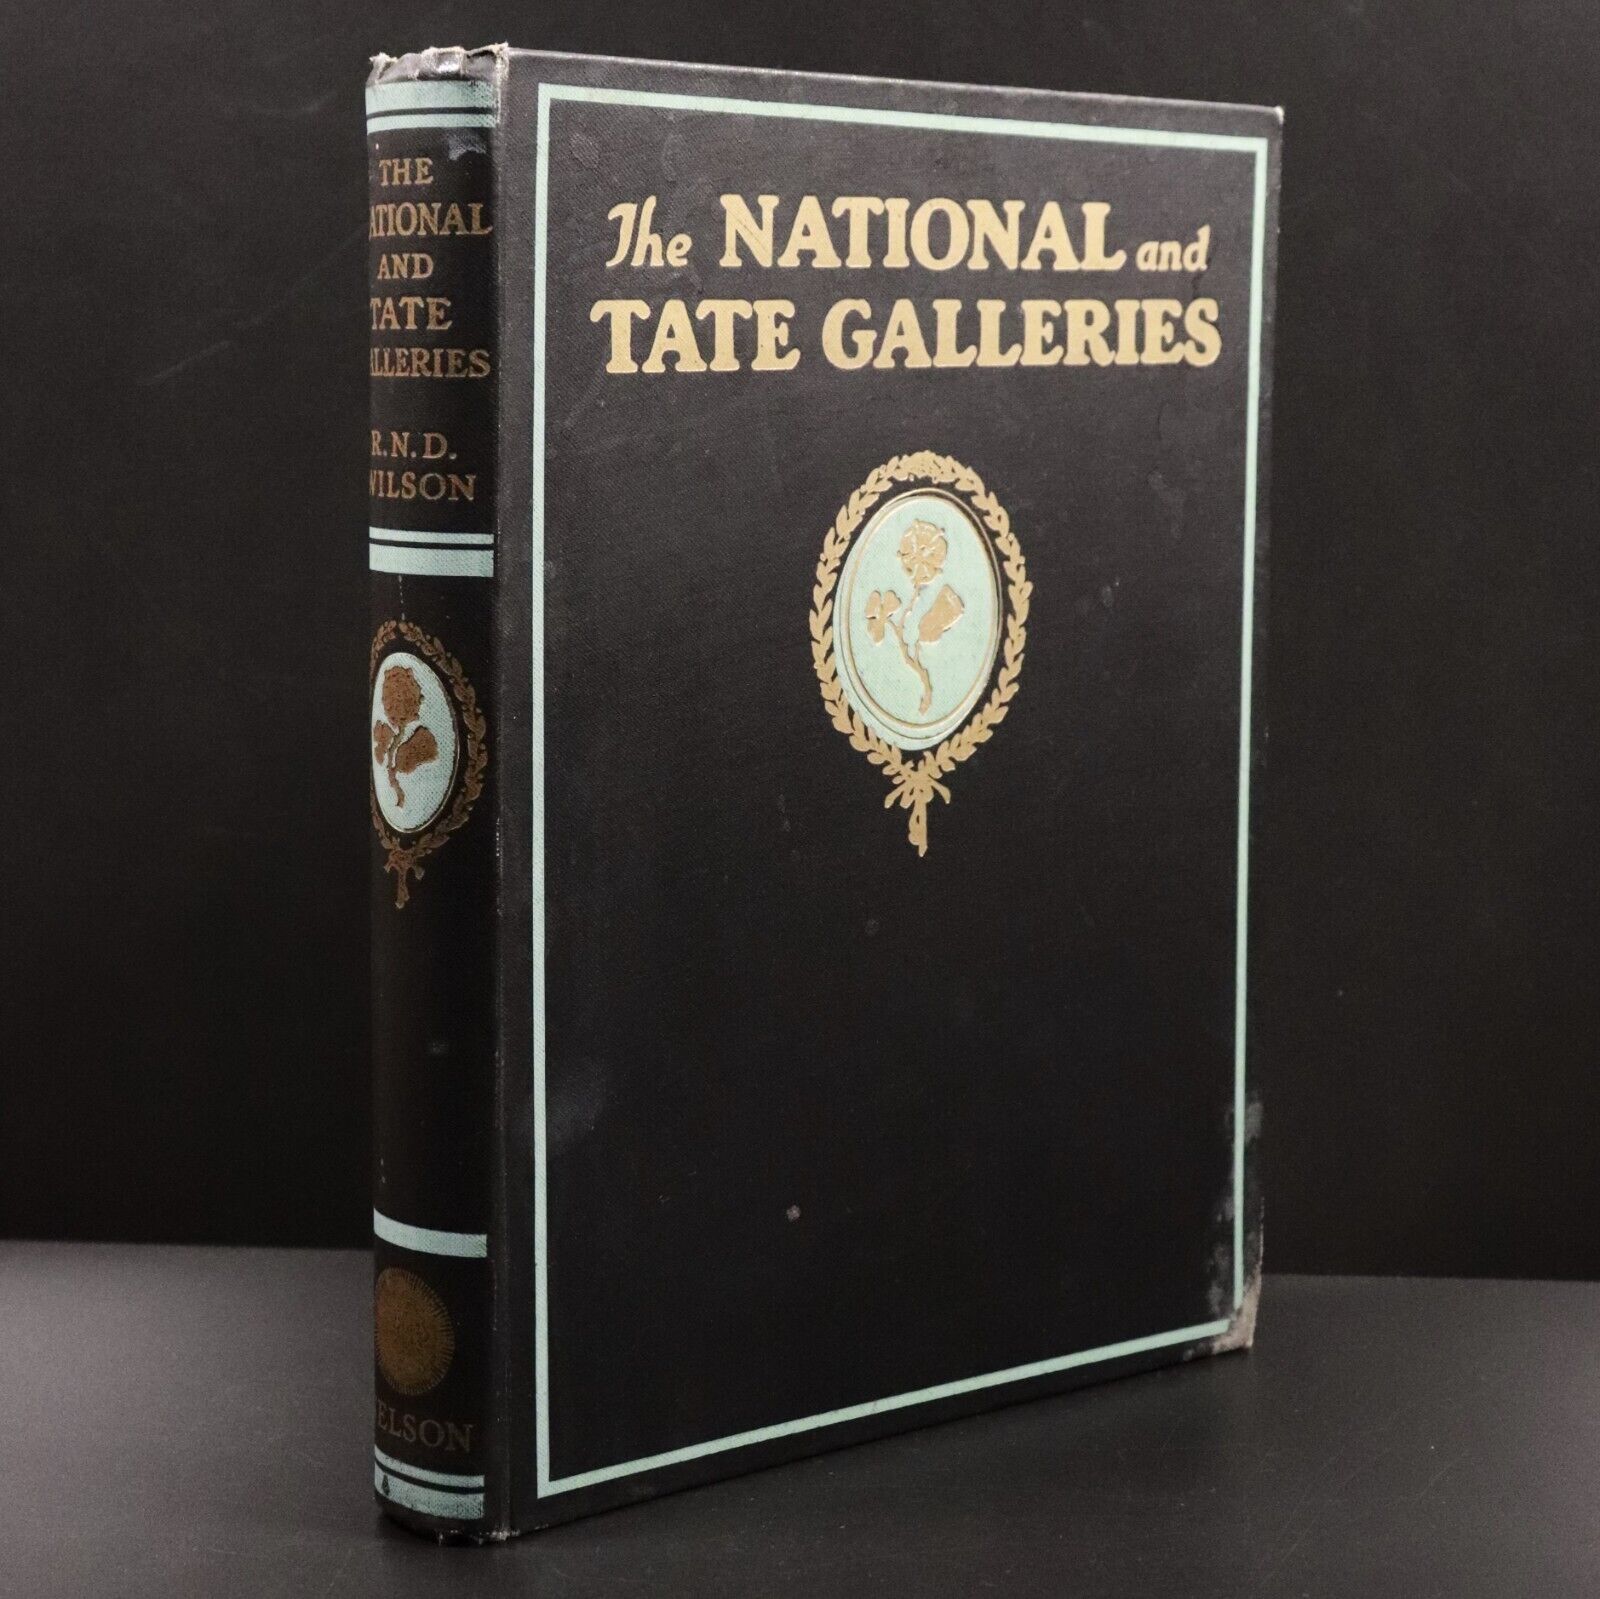 1934 The National & Tate Galleries by R.N.D. Wilson Antique British Art Book